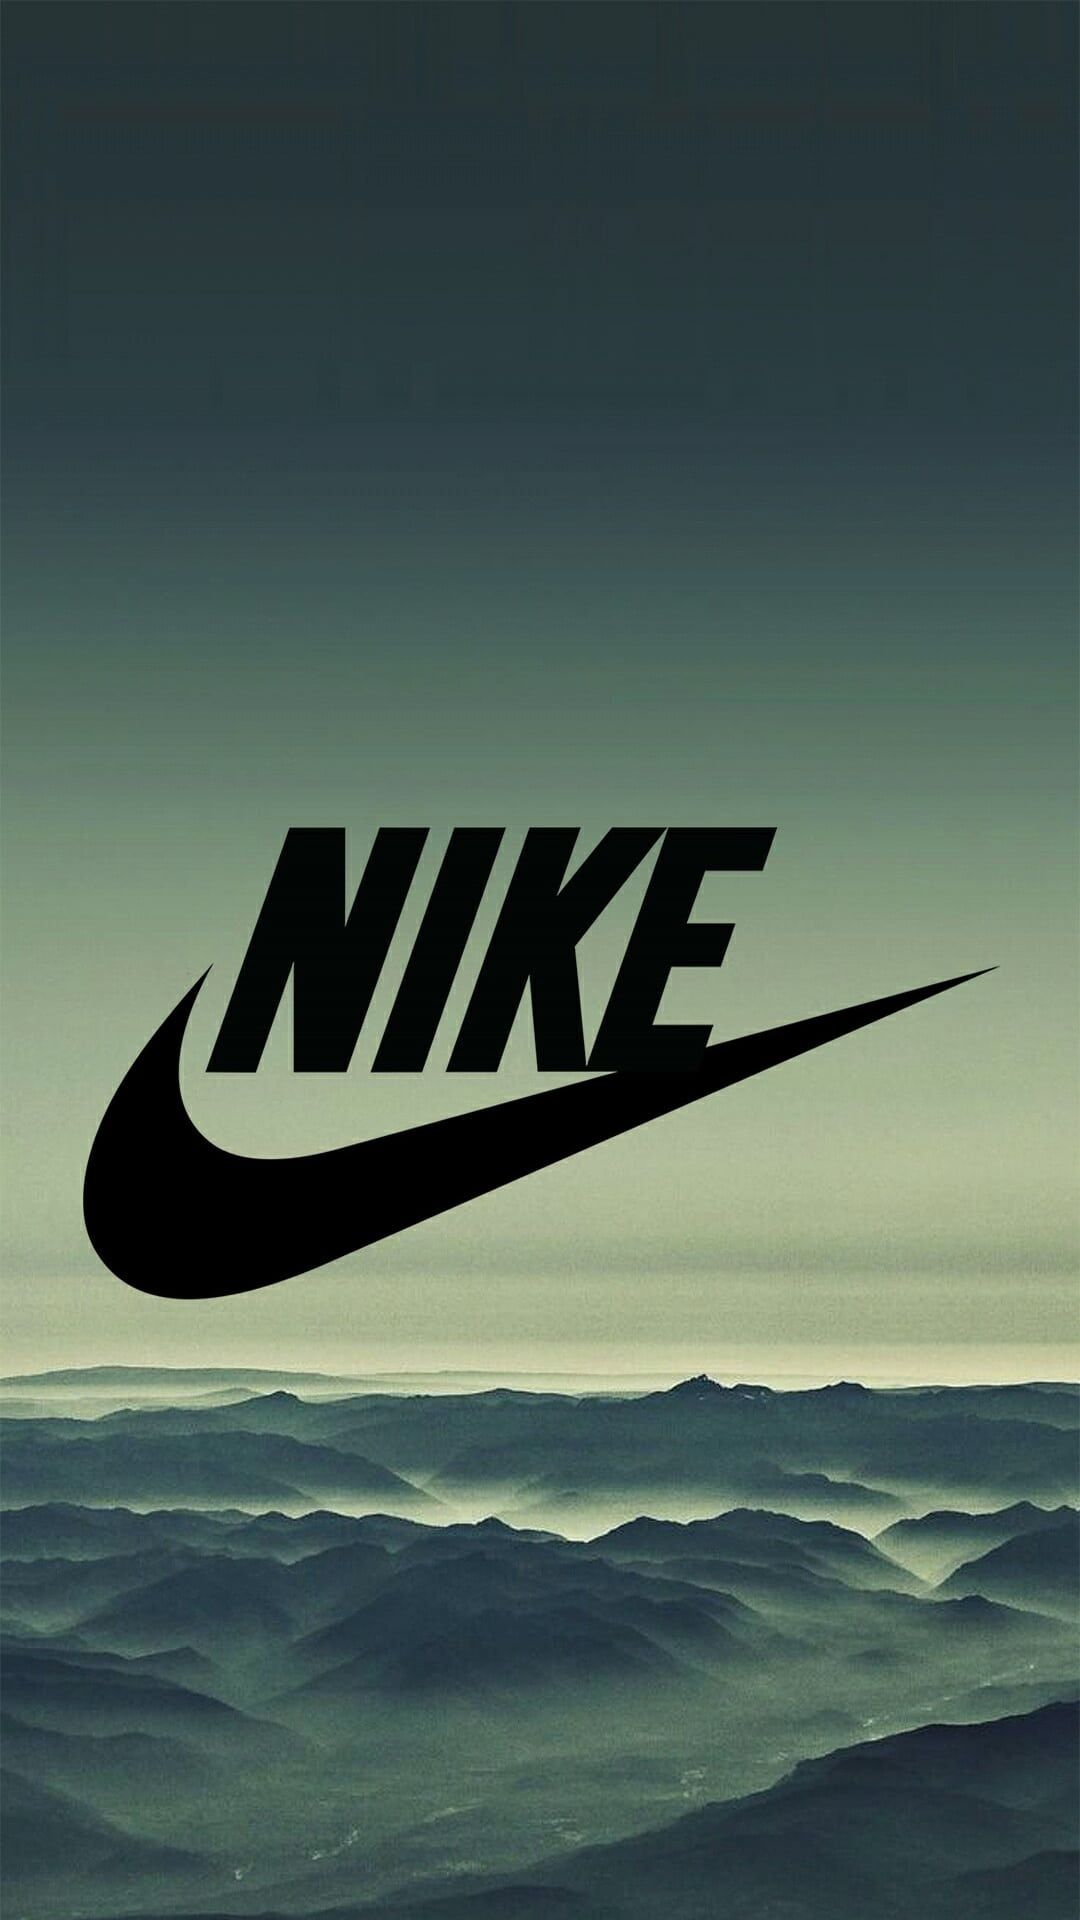 IPhone wallpaper Nike with high-resolution 1080x1920 pixel. You can use this wallpaper for your iPhone 5, 6, 7, 8, X, XS, XR backgrounds, Mobile Screensaver, or iPad Lock Screen - Nike